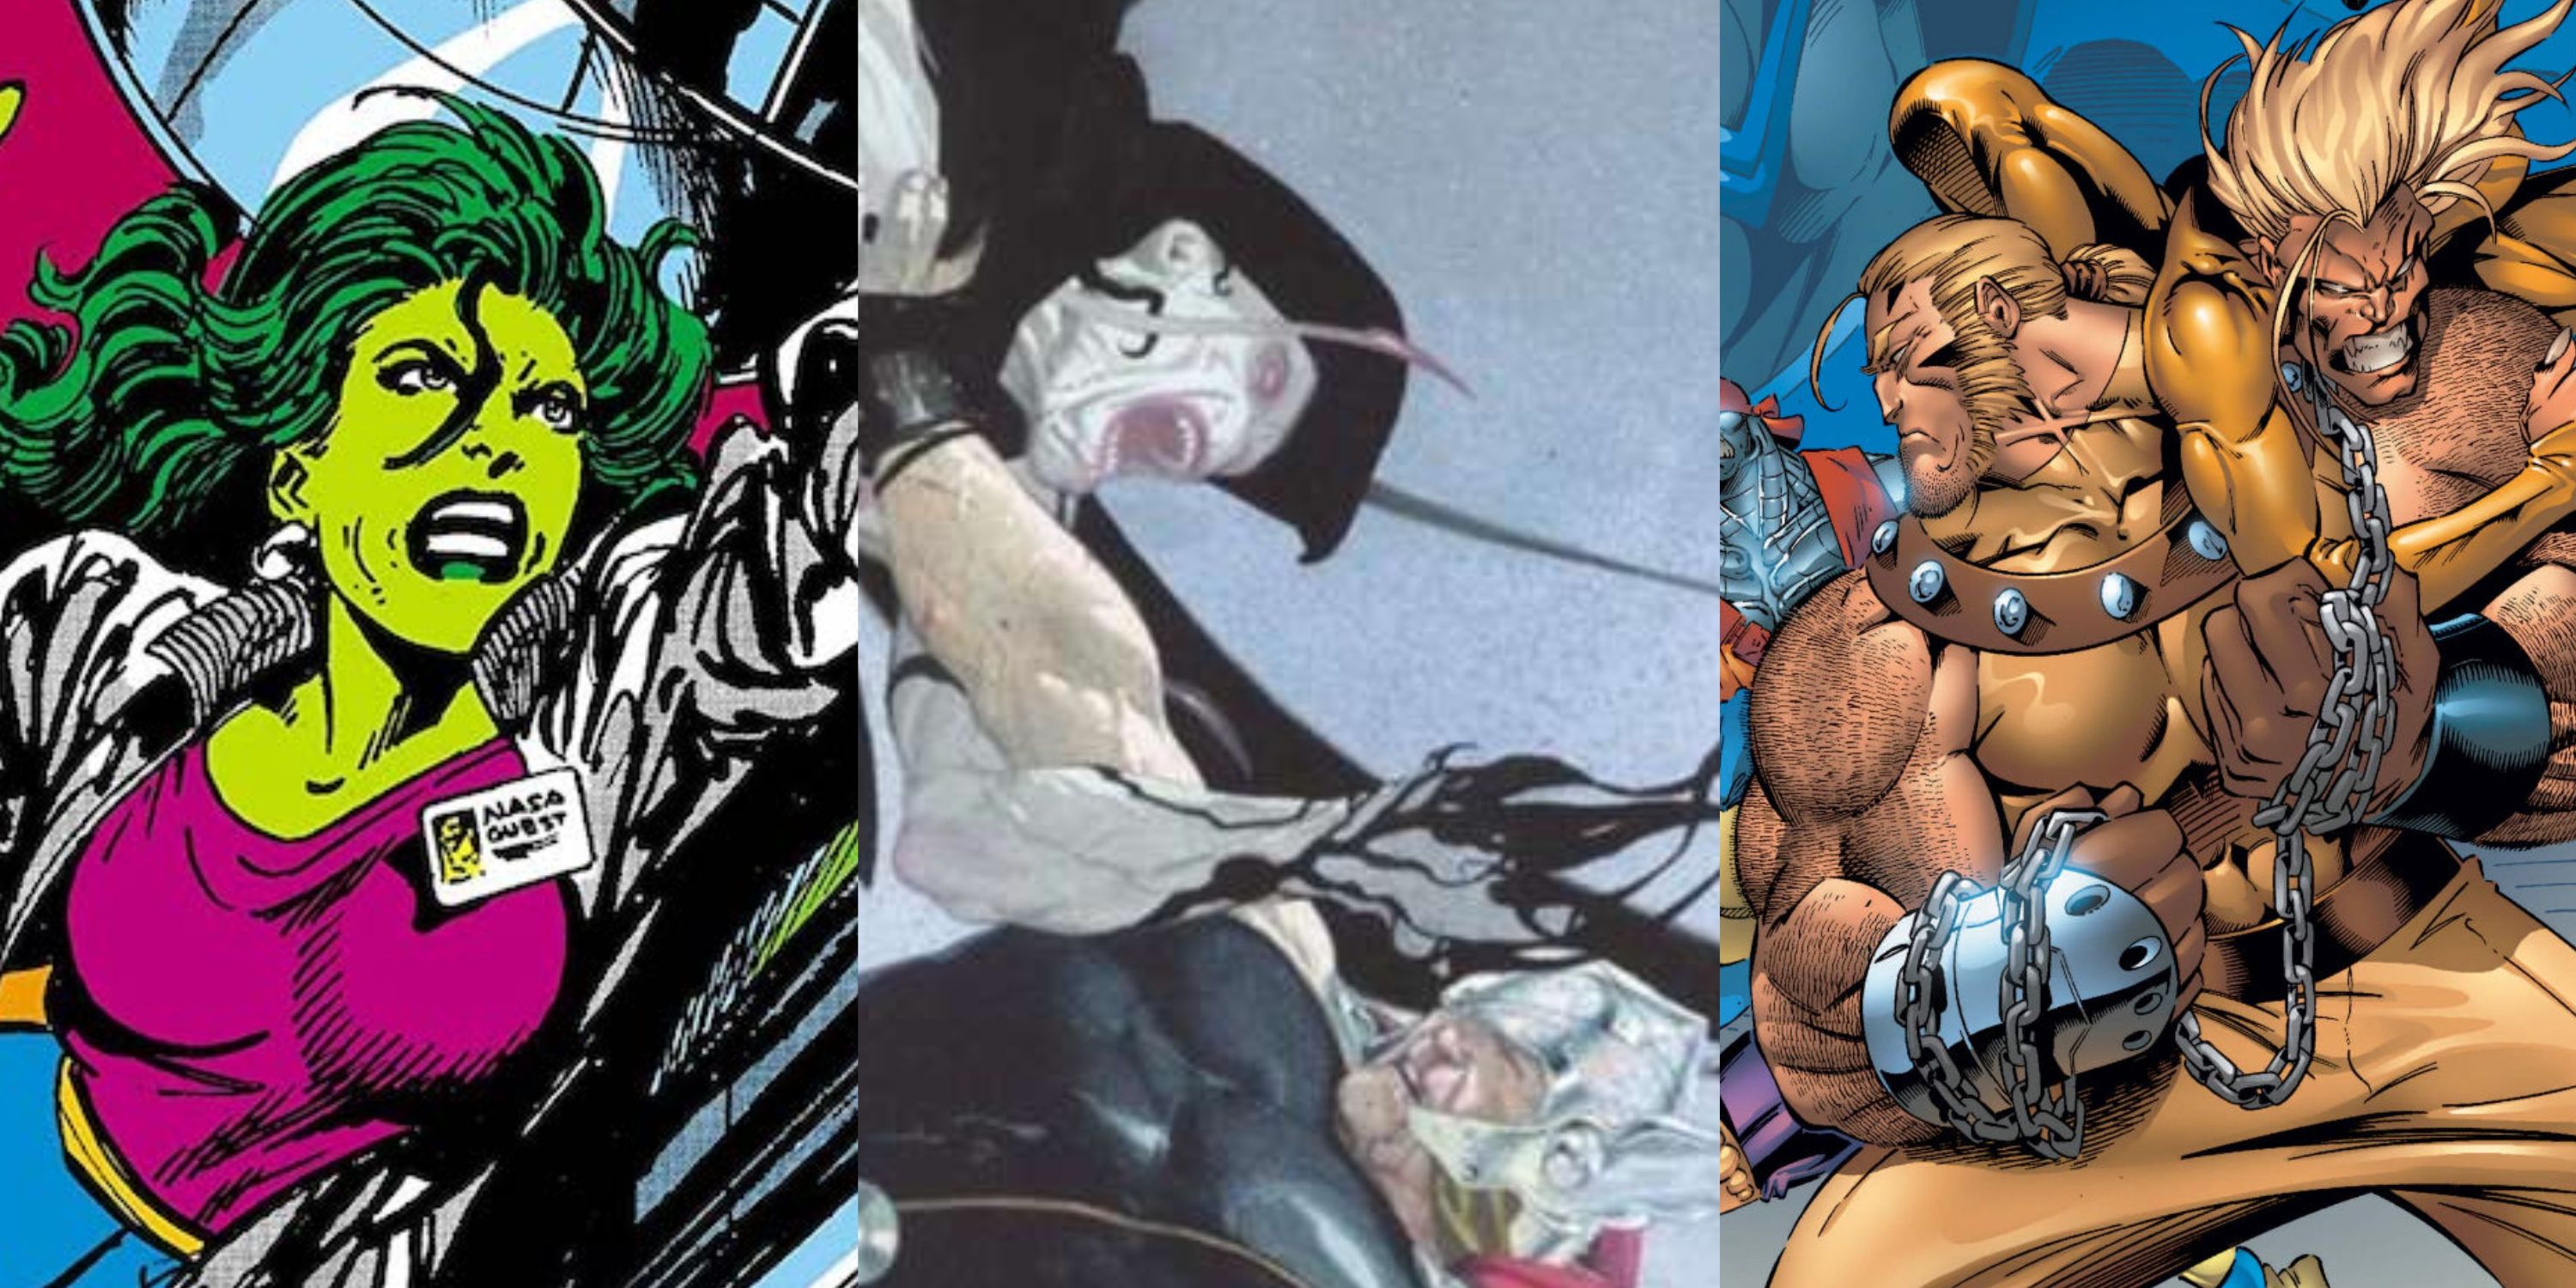 Split image of She-Hulk, Thor and Gorr fighting and Sabretooth in Age of Apocalypse